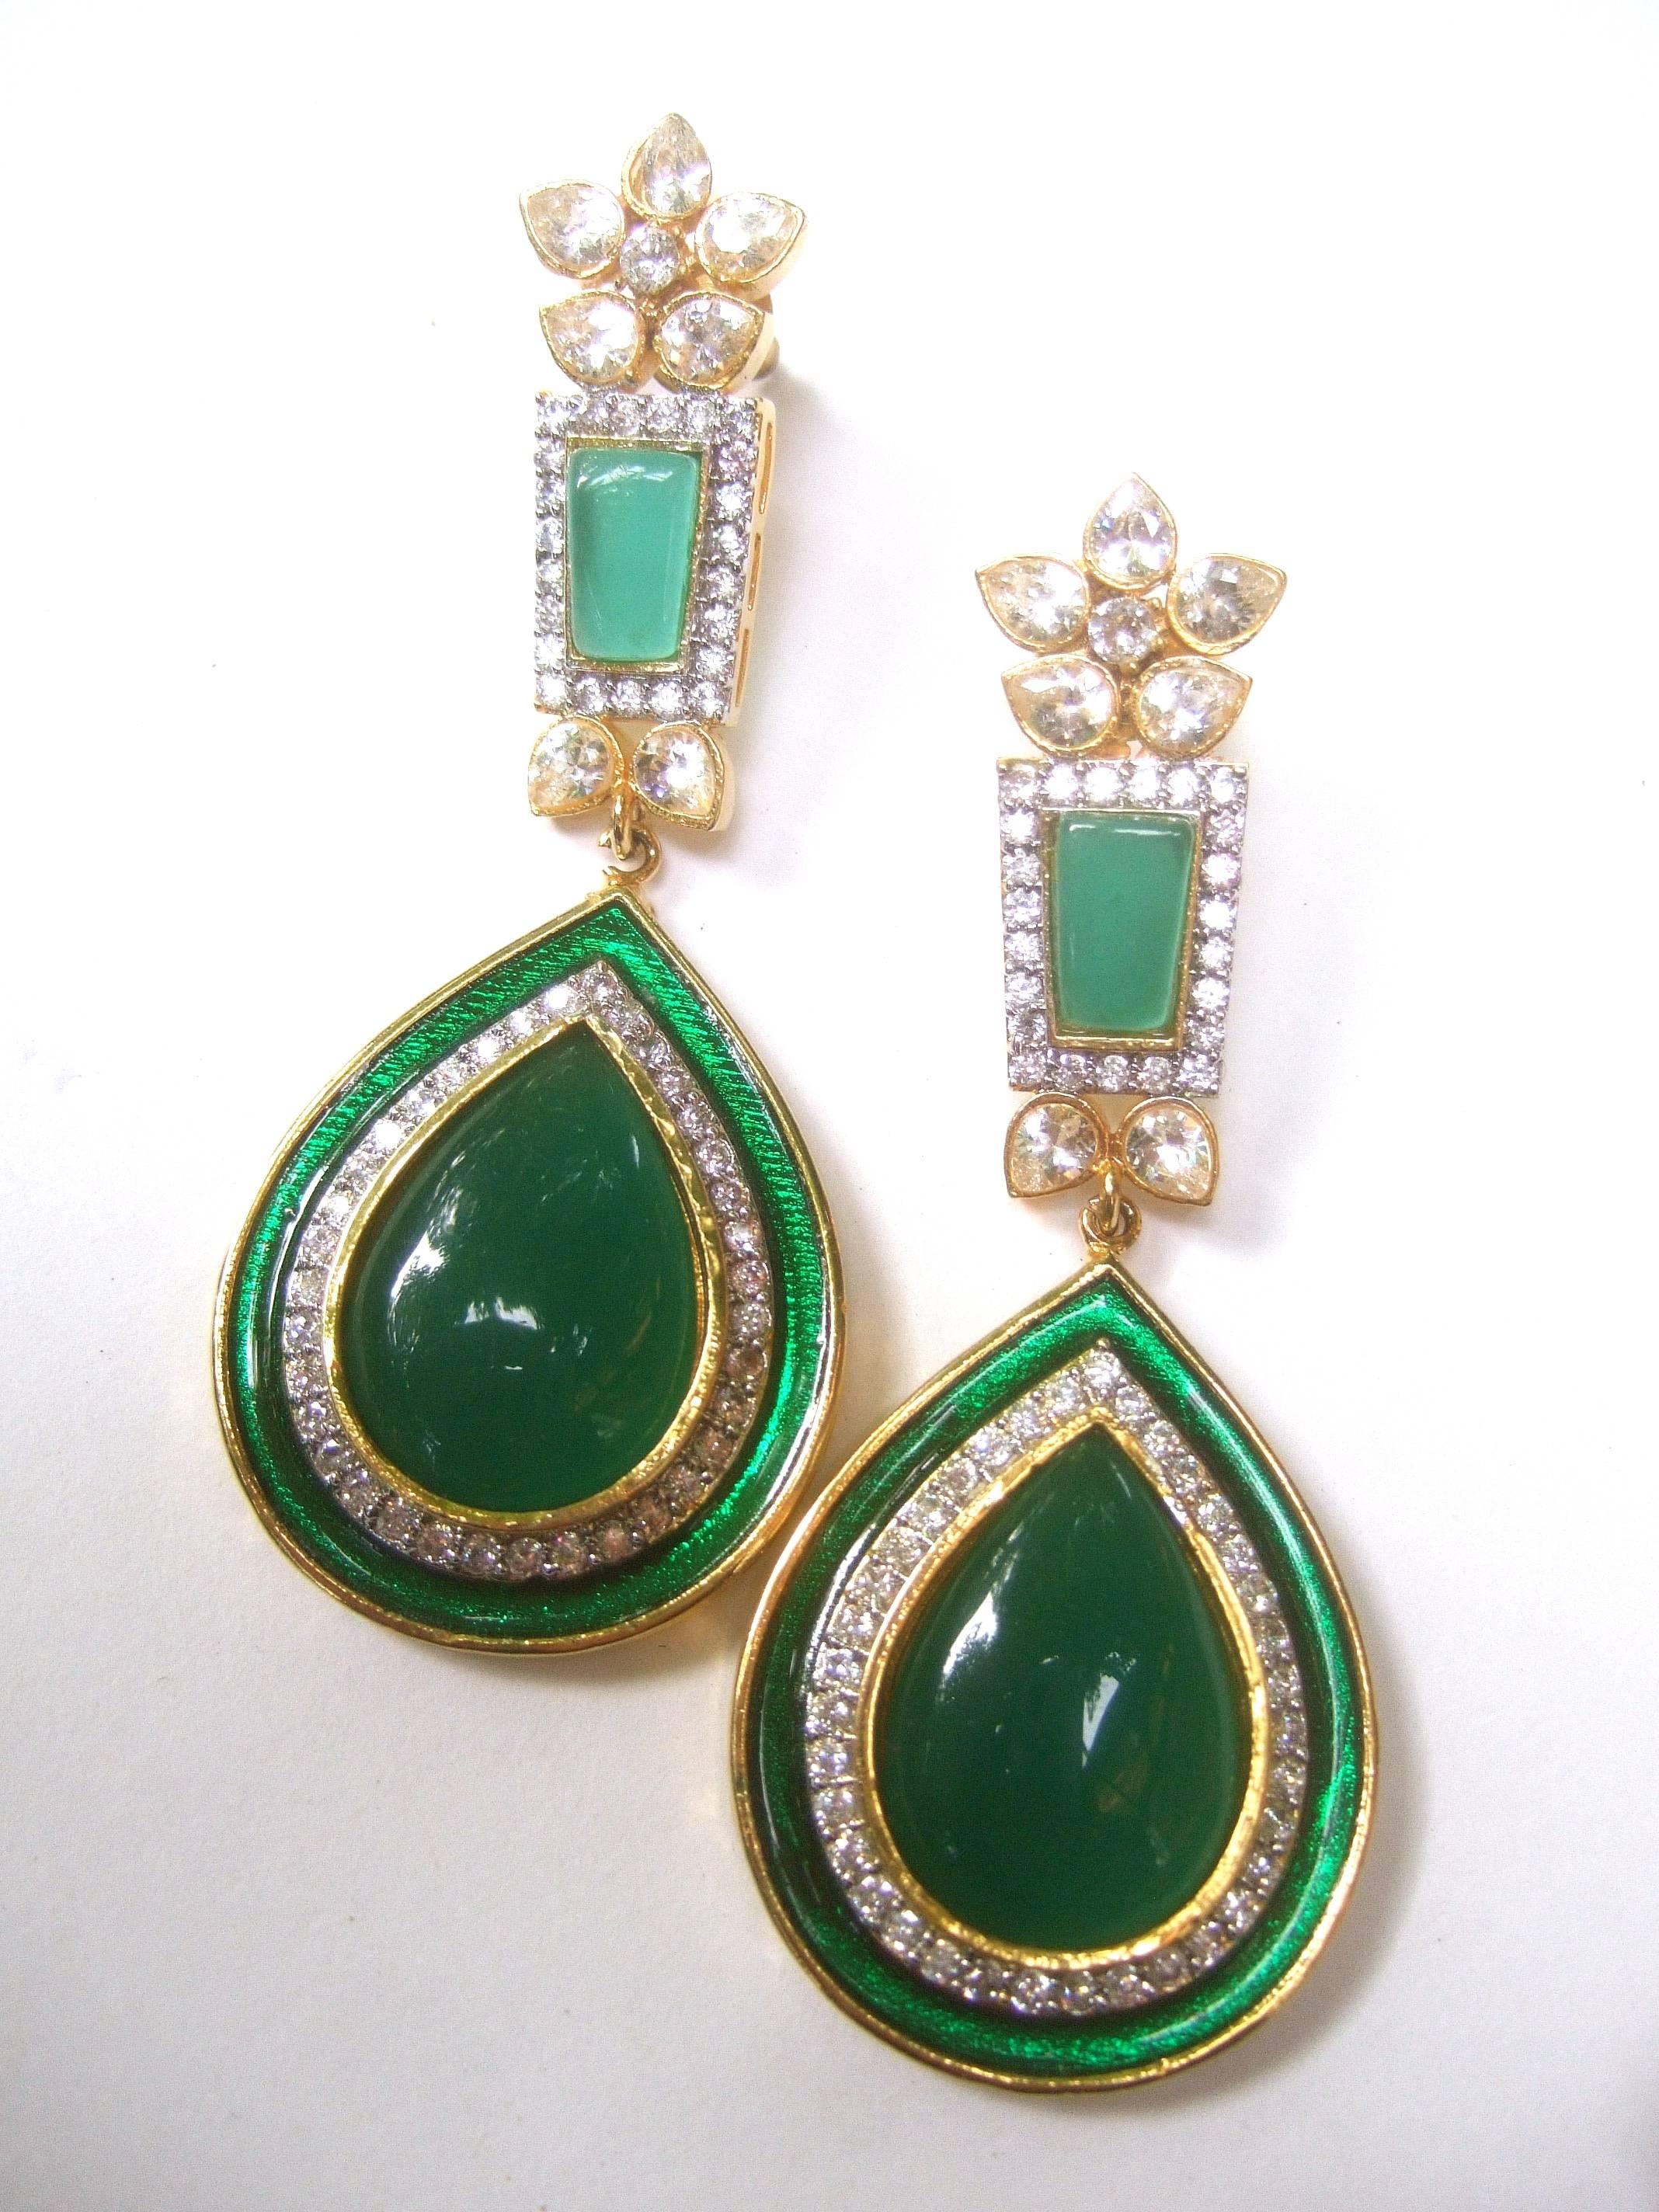 Exquisite Emerald Green Poured Glass Tear Drop Crystal Earrings  2